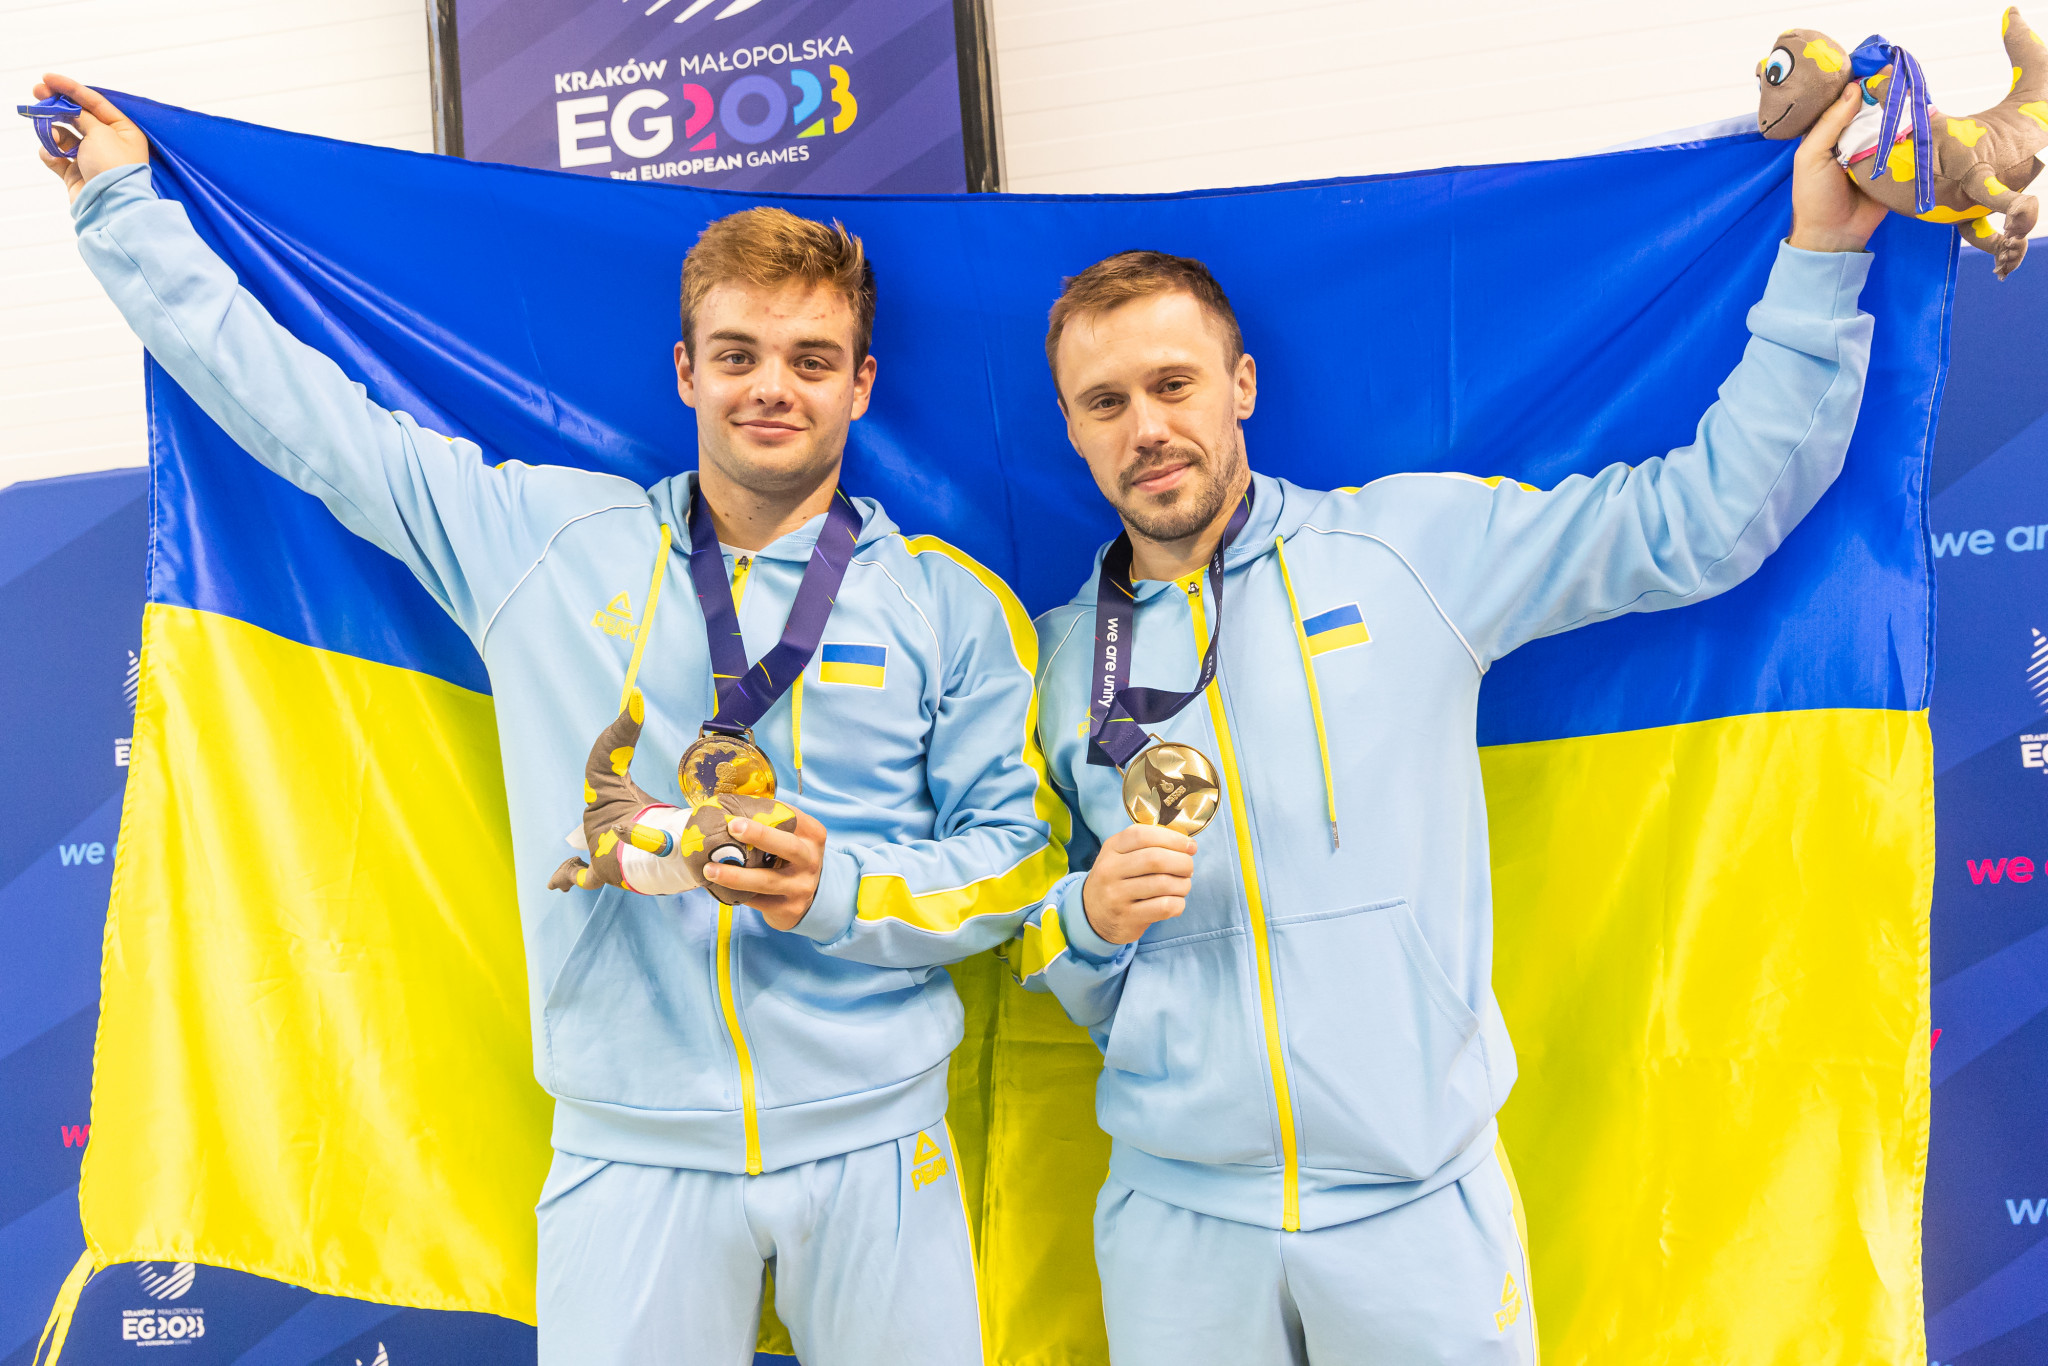 Diving events conclude with golds for Switzerland and Ukraine at Kraków-Małopolska 2023